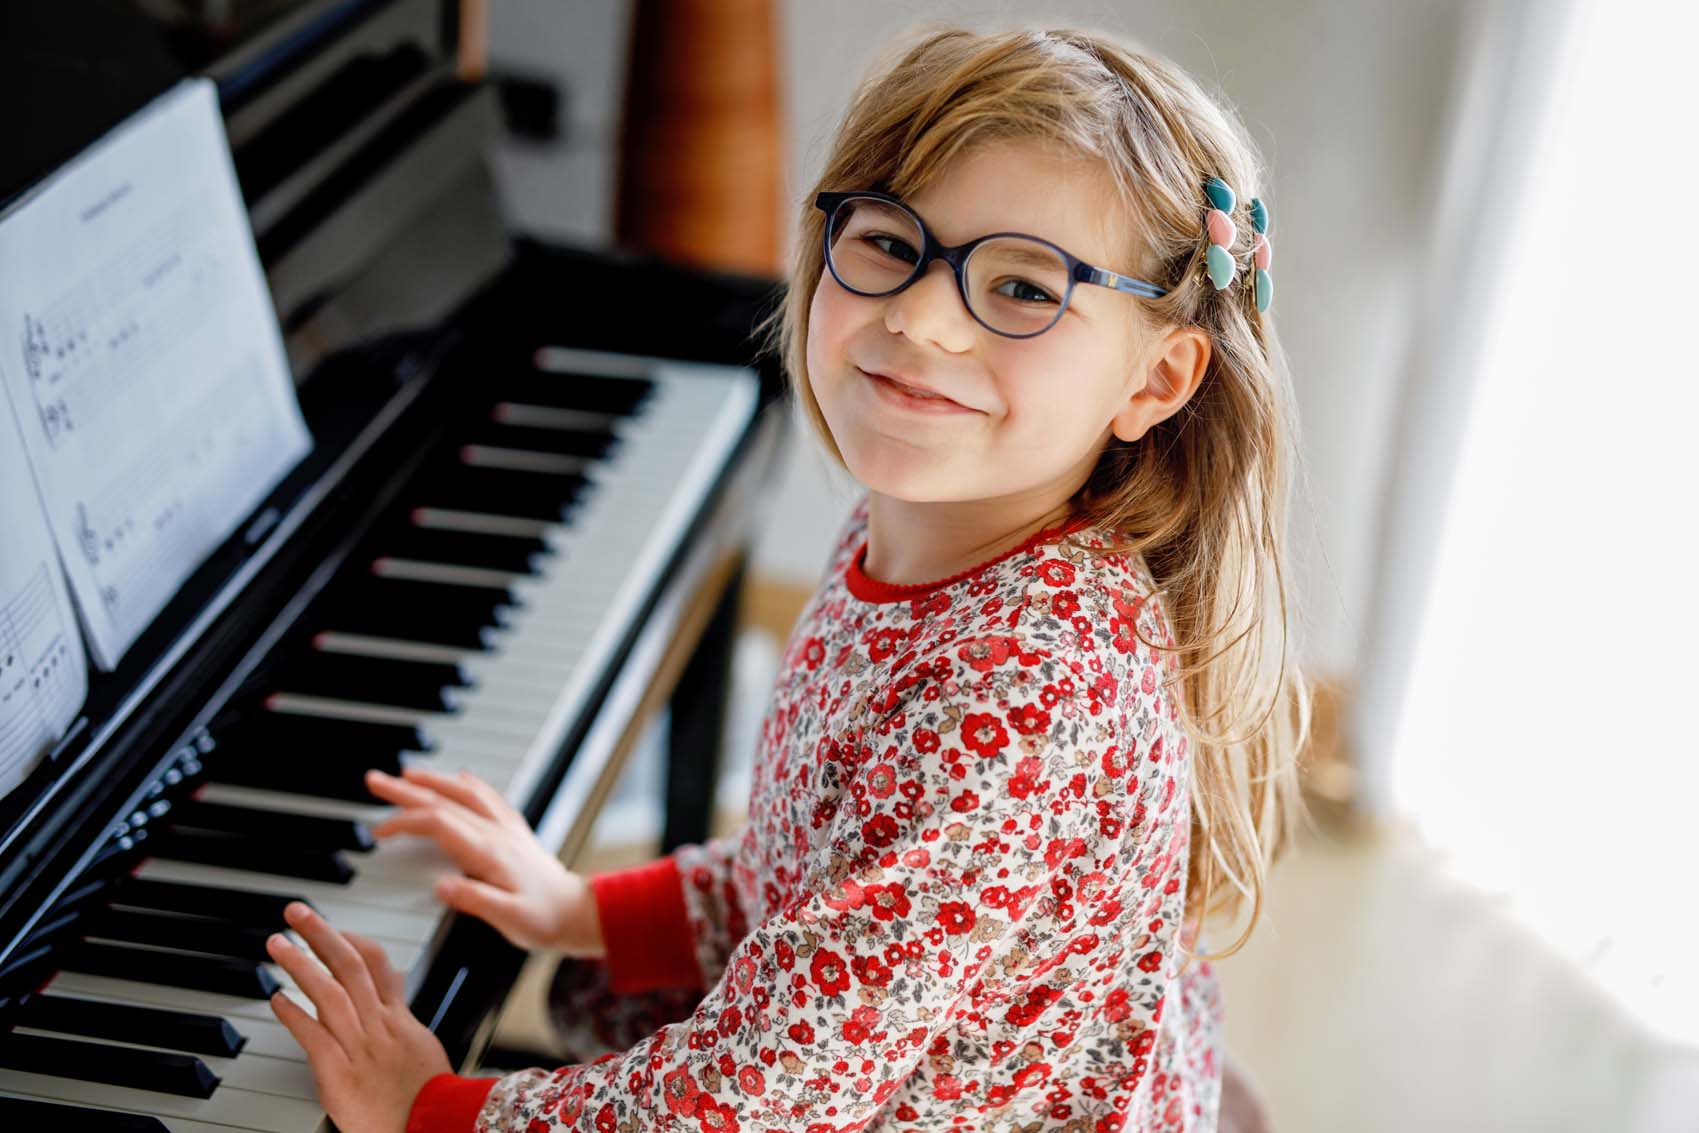 Little happy girl playing piano in living room. Cute preschool child with eye glasses having fun with learning to play music instrument